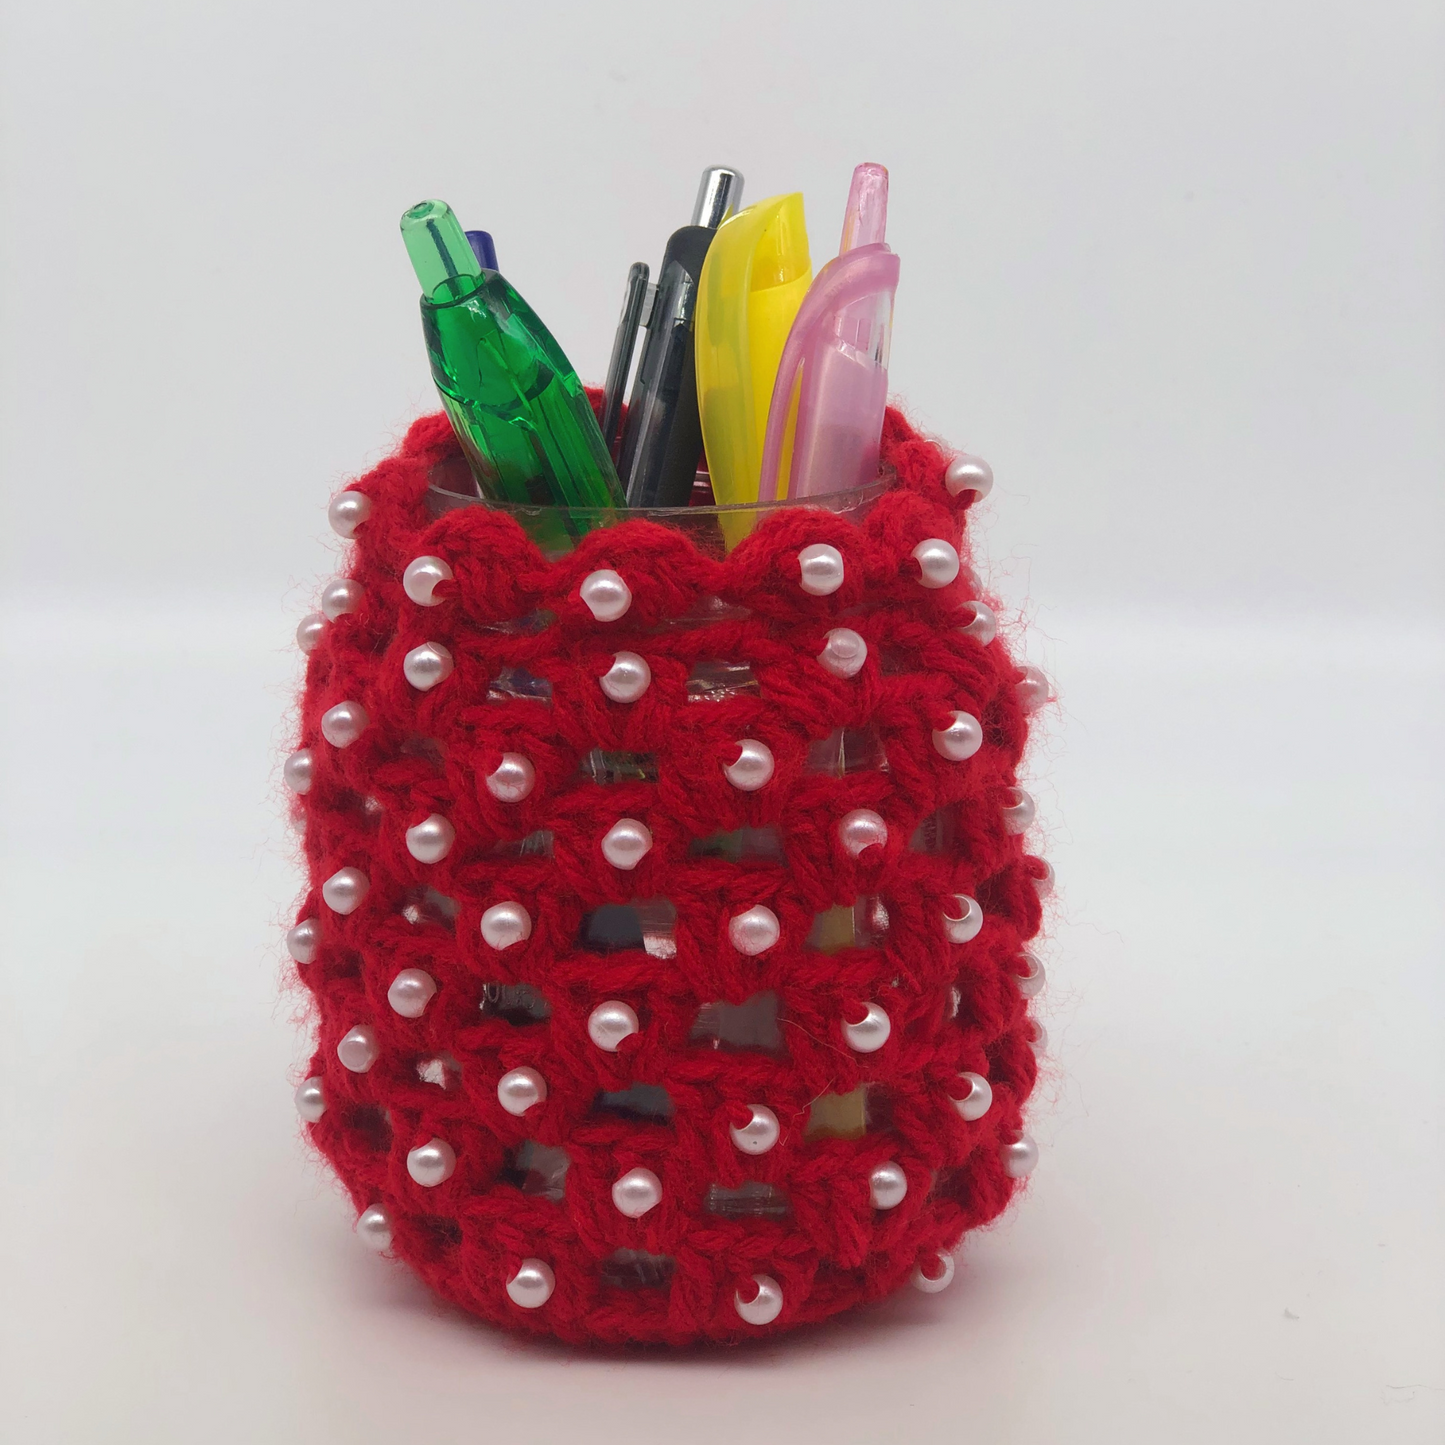 Red Yarn with White Pearls Cozie